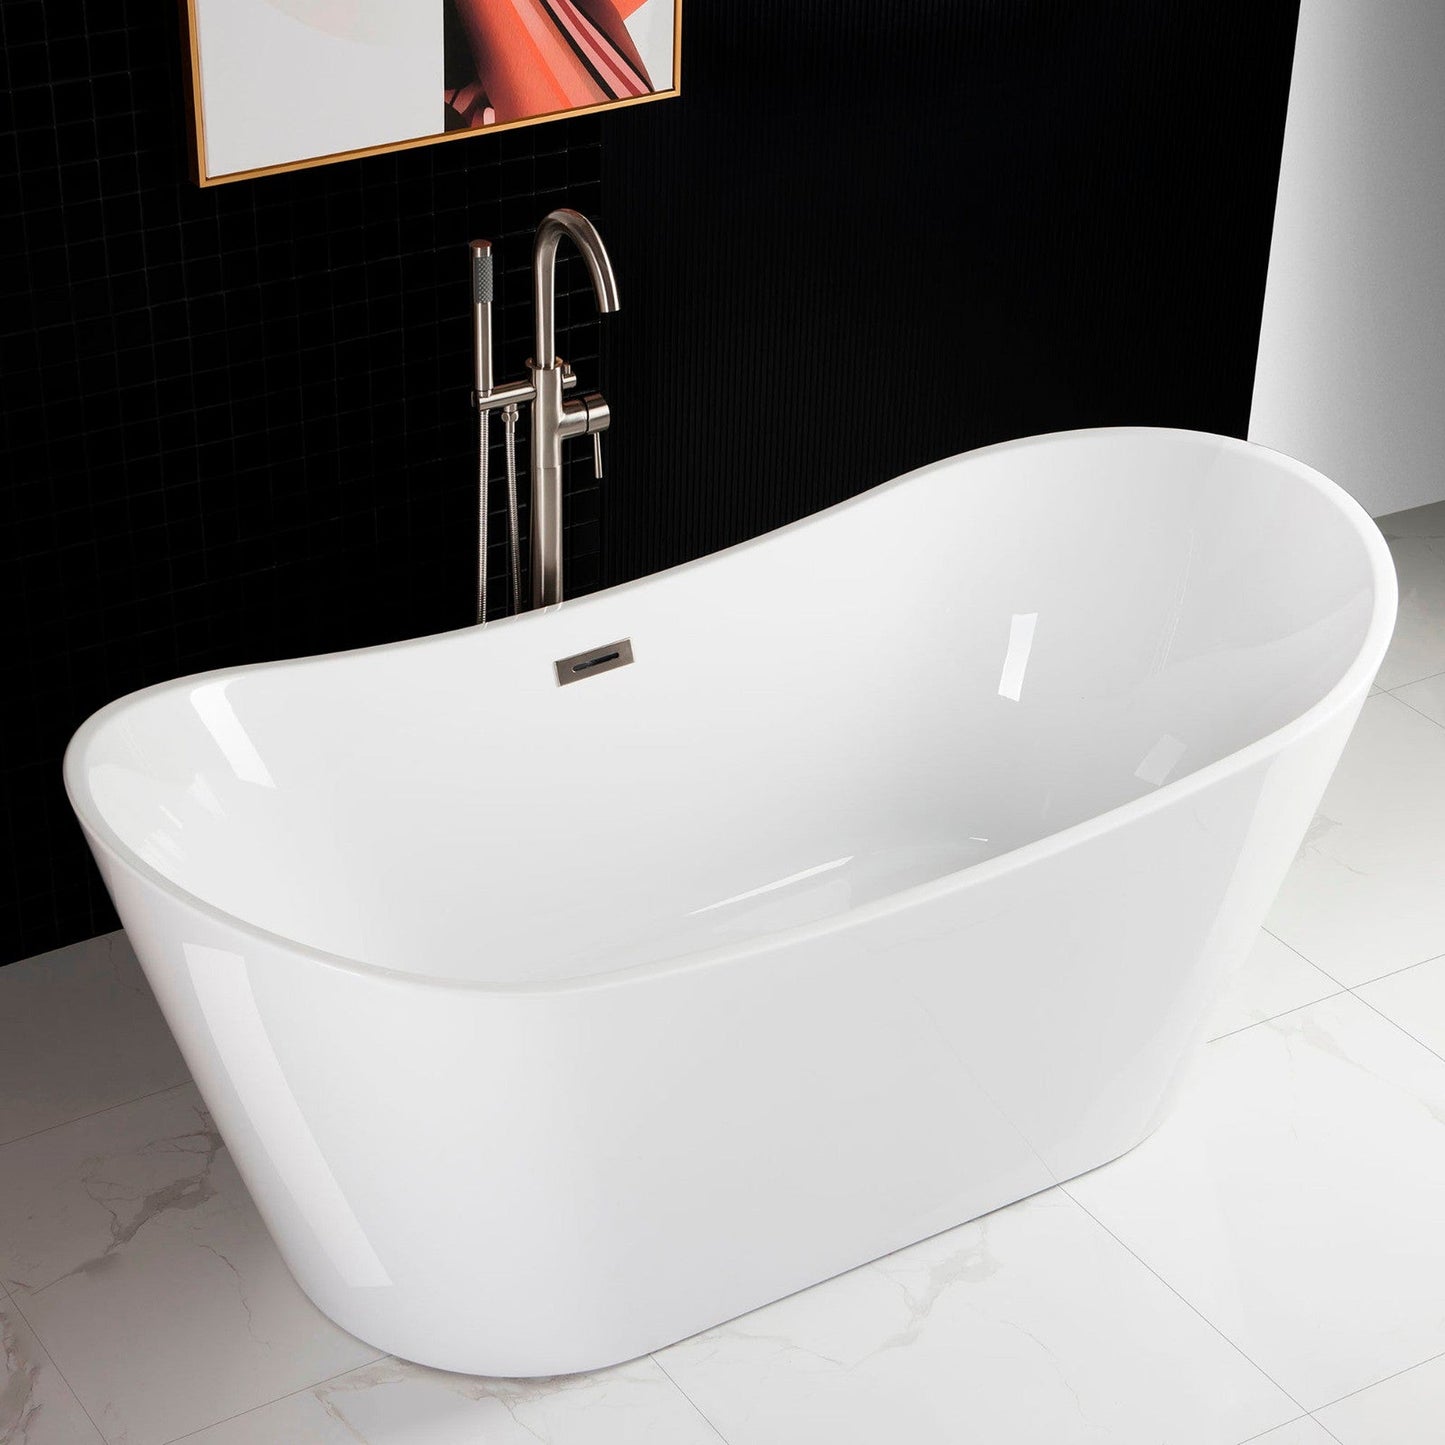 WoodBridge B0010 67" White Acrylic Freestanding Contemporary Soaking Bathtub With Chrome Drain, Overflow, F0002CHSQ Tub Filler and Caddy Tray